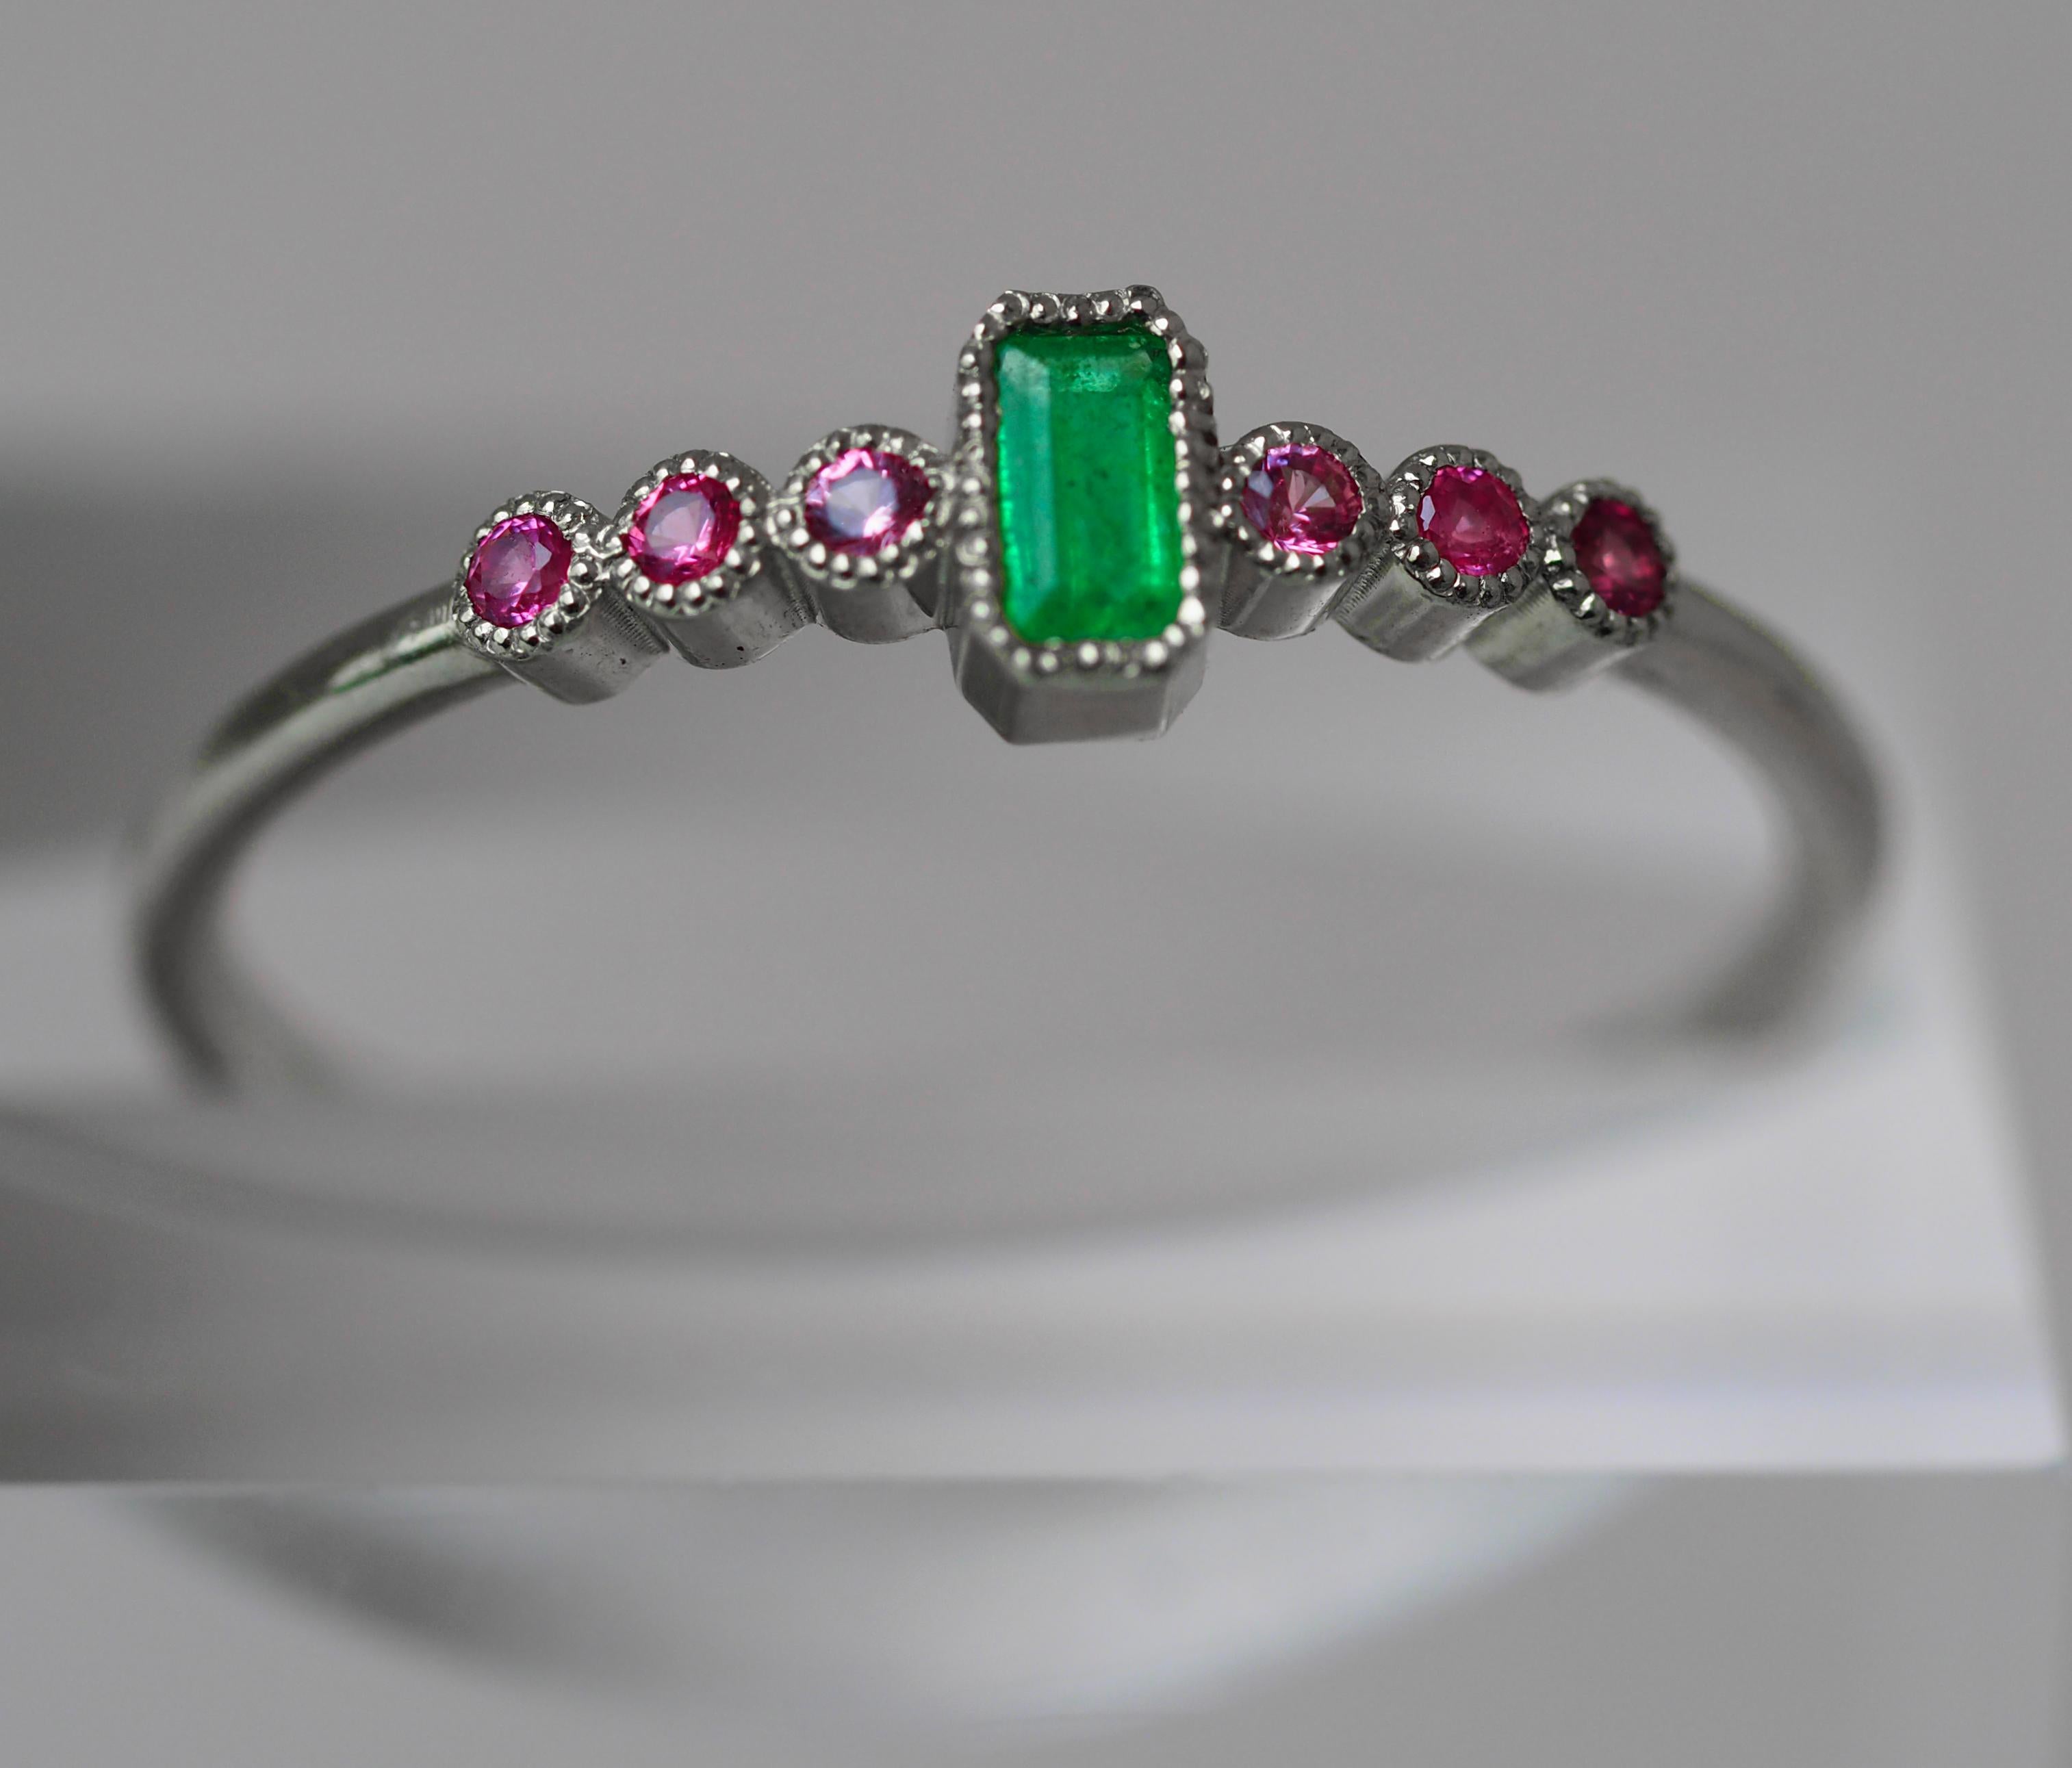 For Sale:  Baguette Cut Emerald and Sapphires 14k gold ring! 7